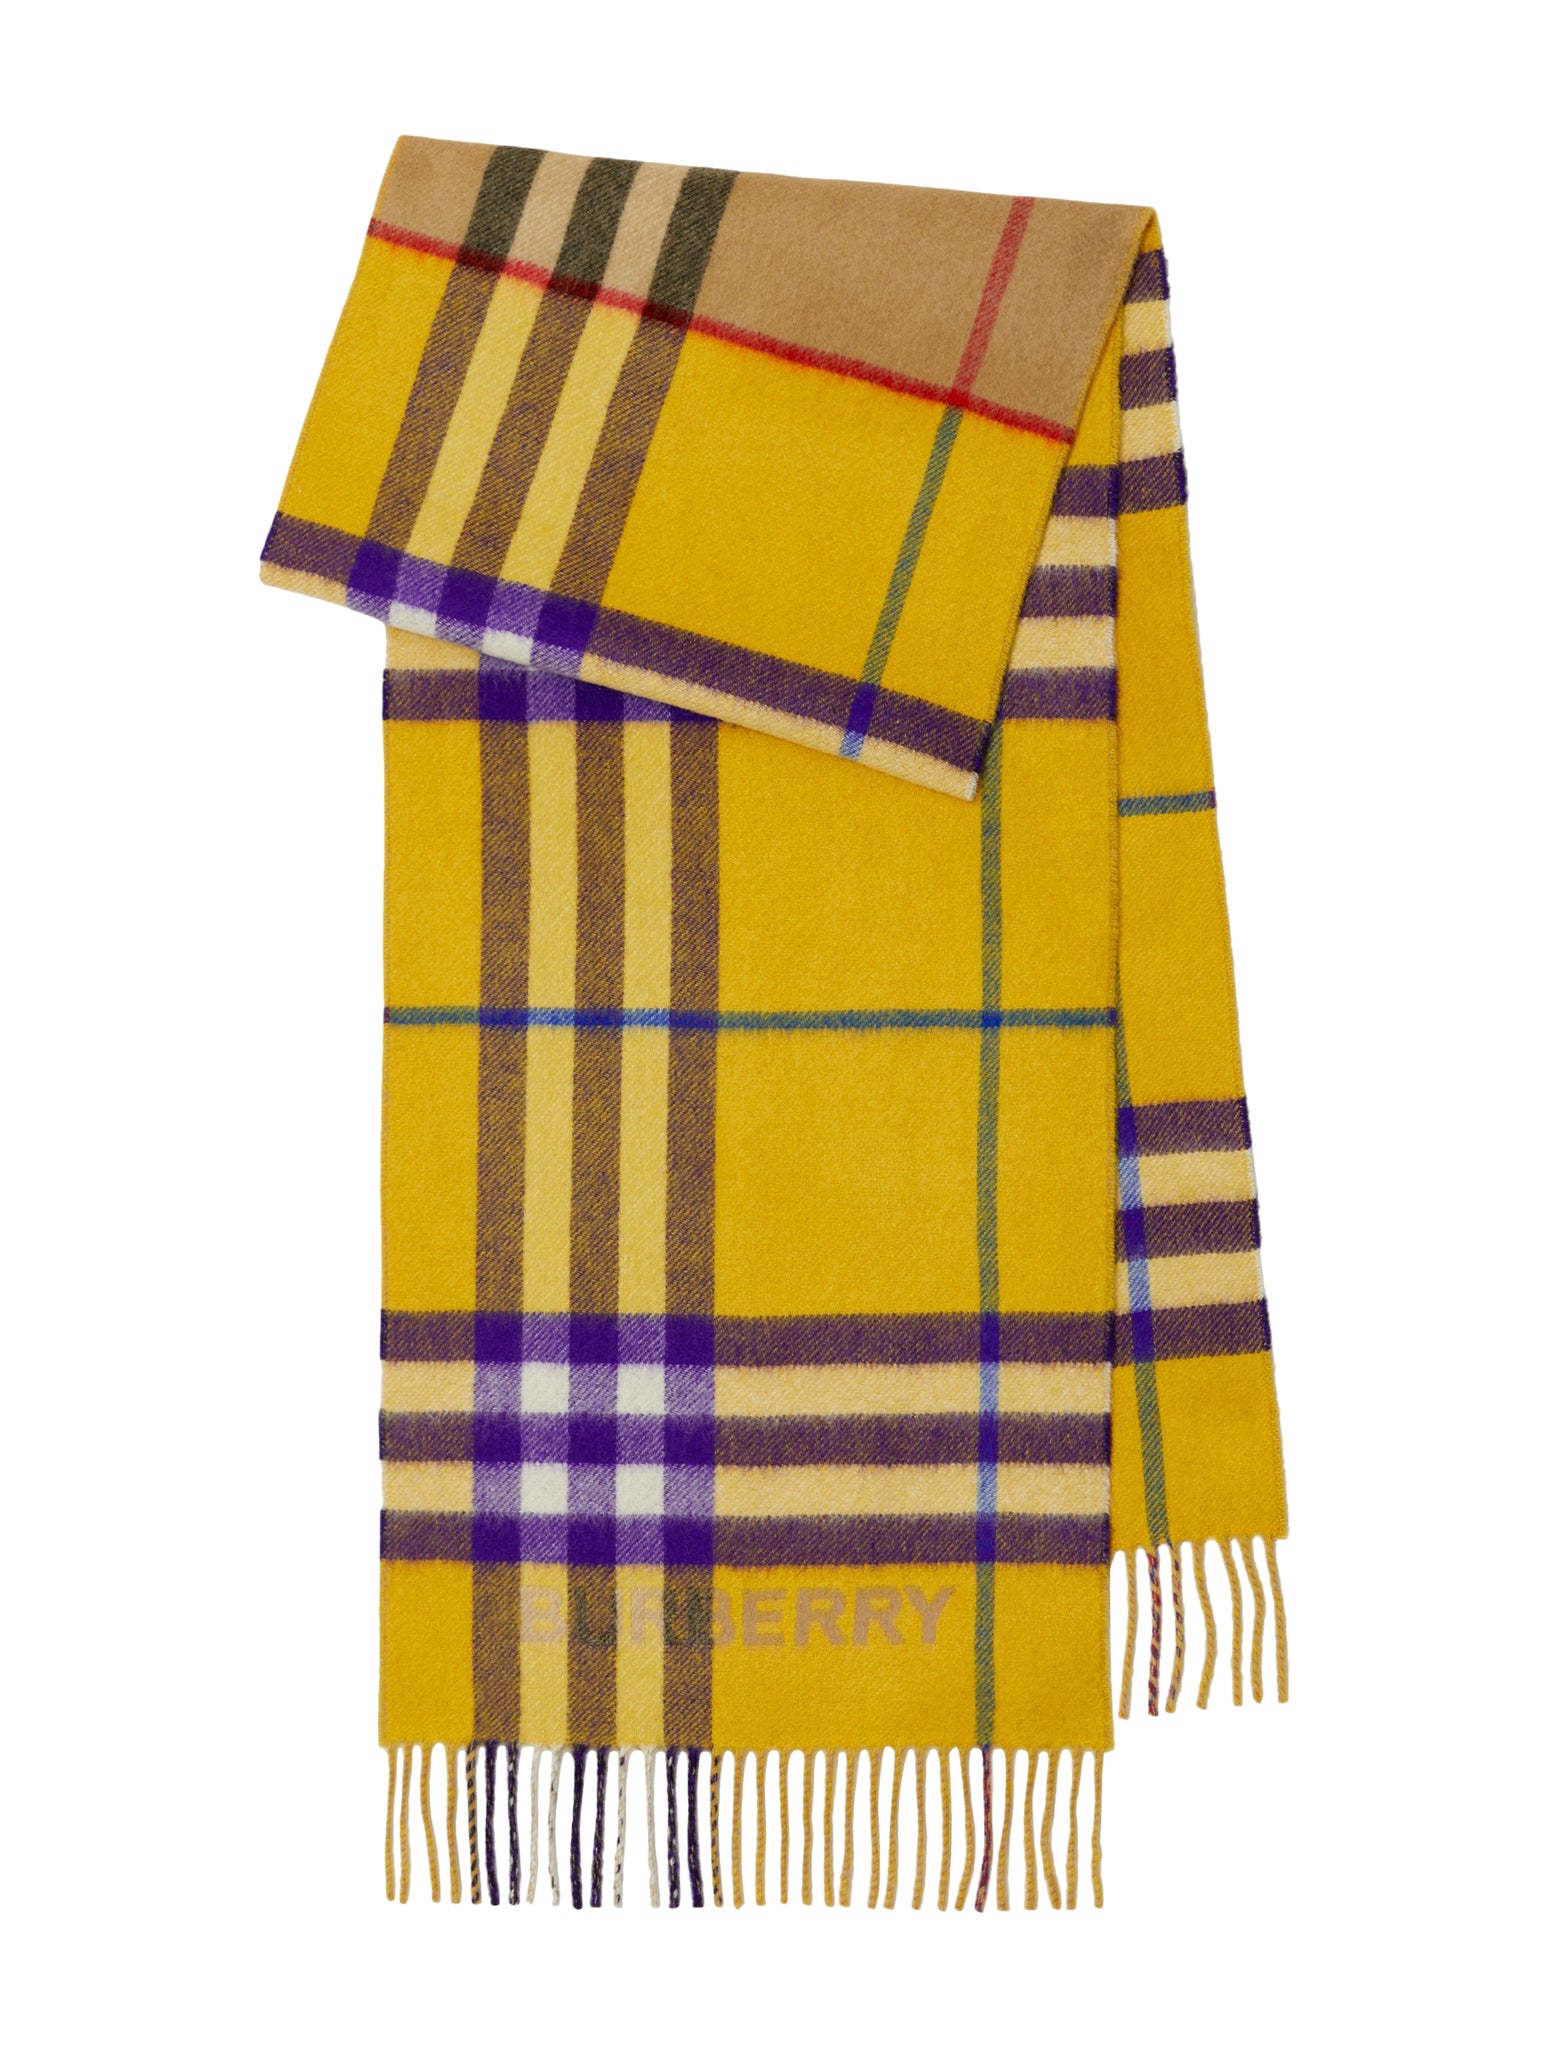 Burberry London 100% Cashmere Classic Plaid 56"x12" Scarf - Made  in England